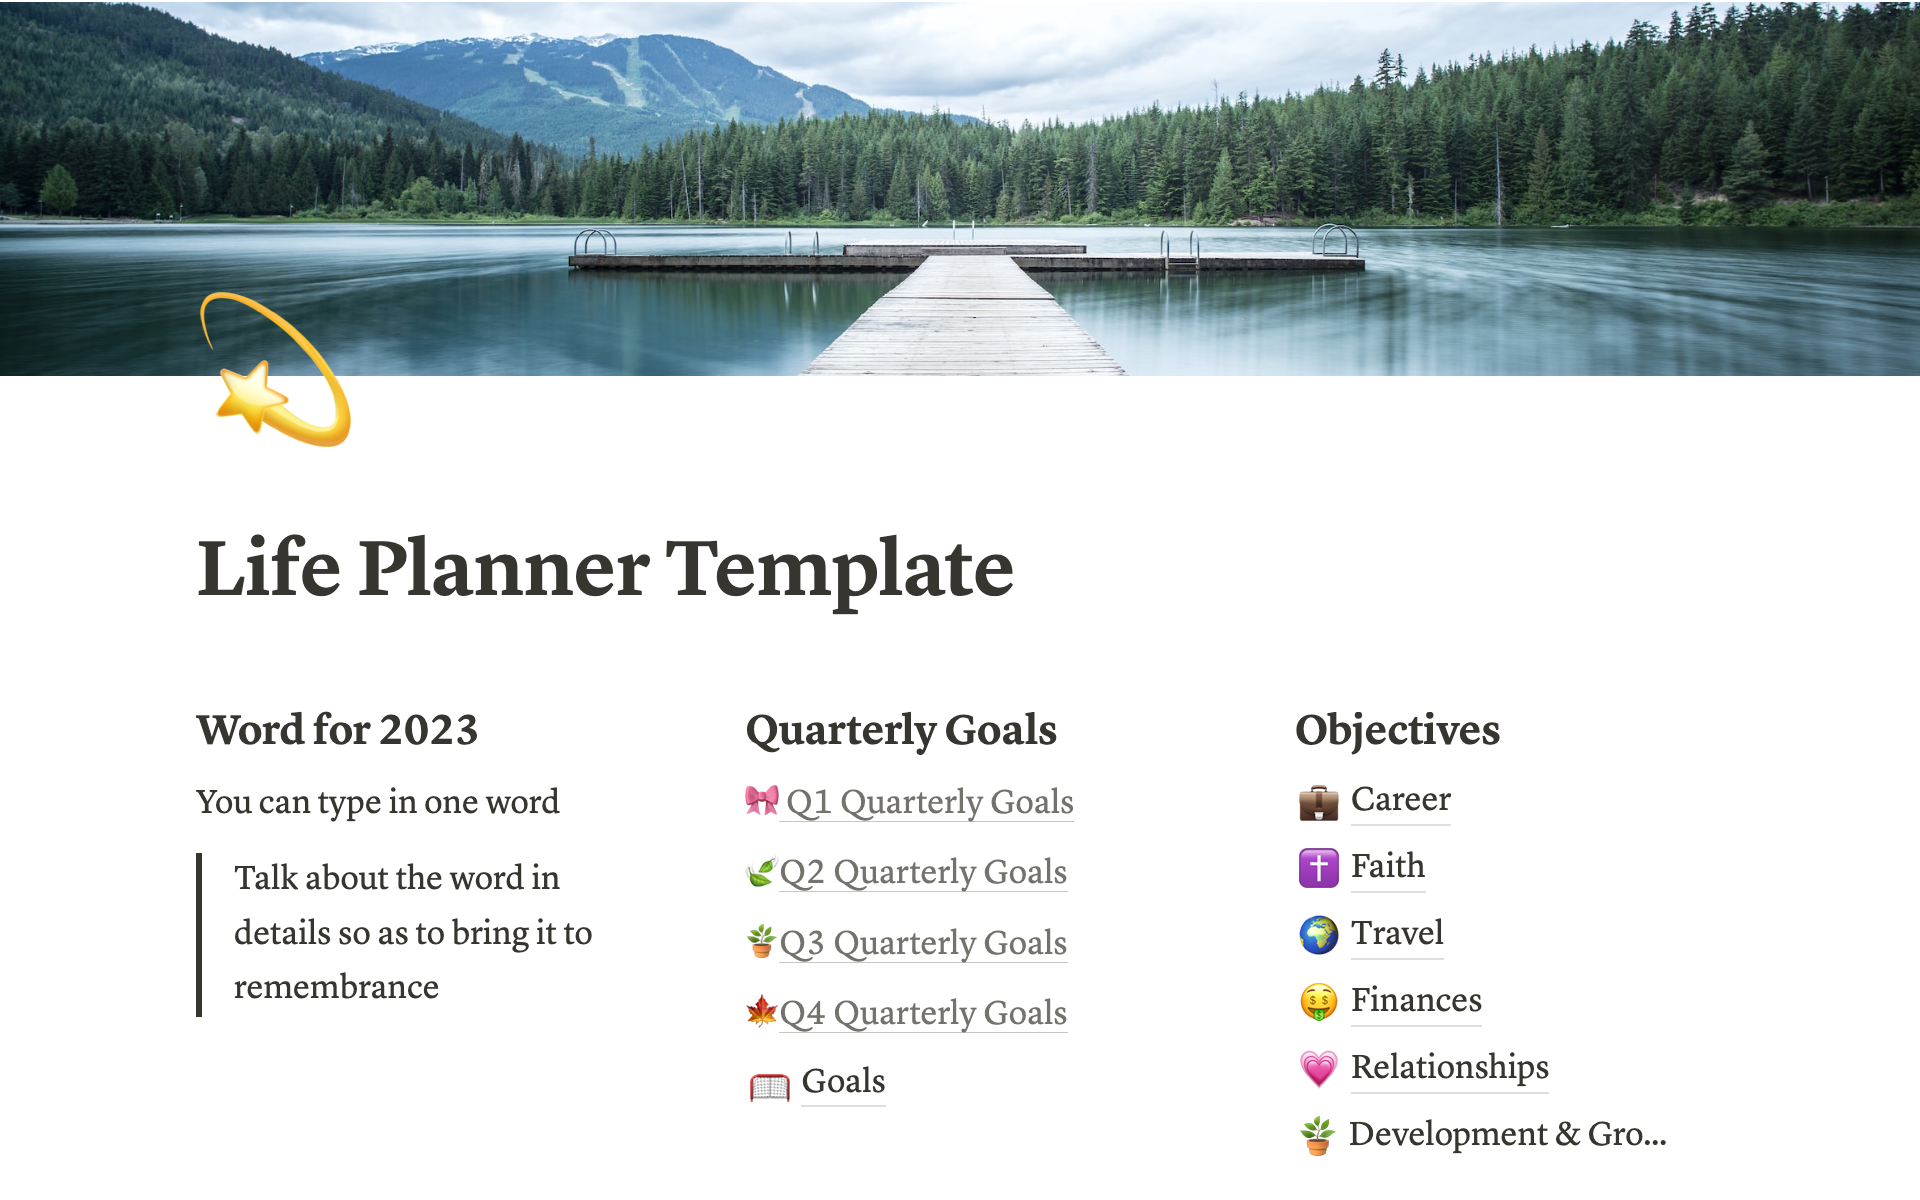 This template helps anyone to keep track of goals in different aspects of their lives.